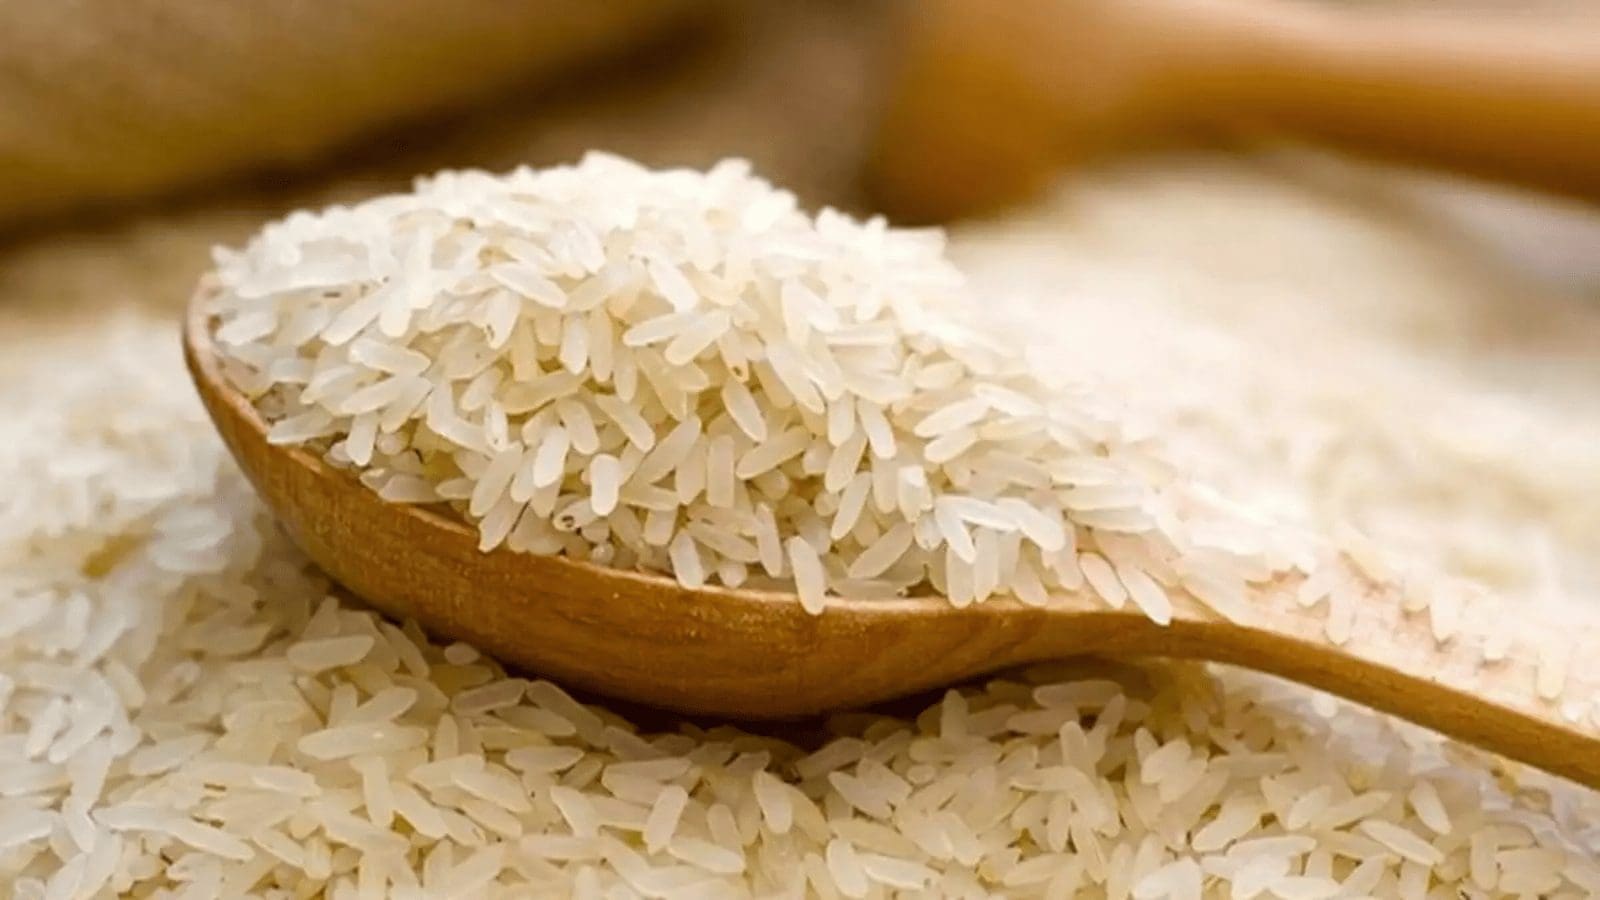 India to extend rice export bans, impacting global prices